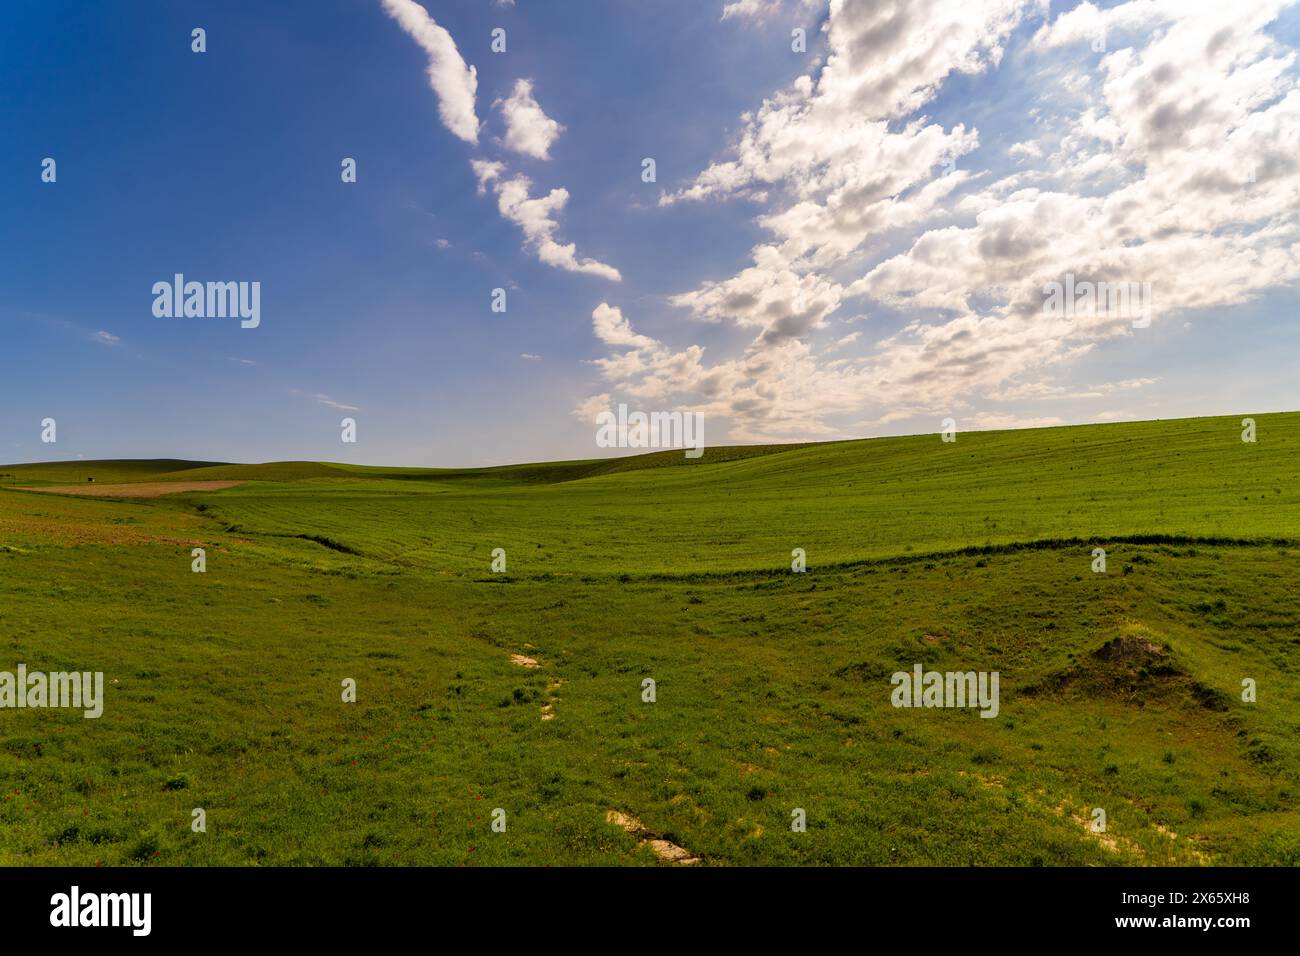 A large, open field with a clear blue sky Stock Photo